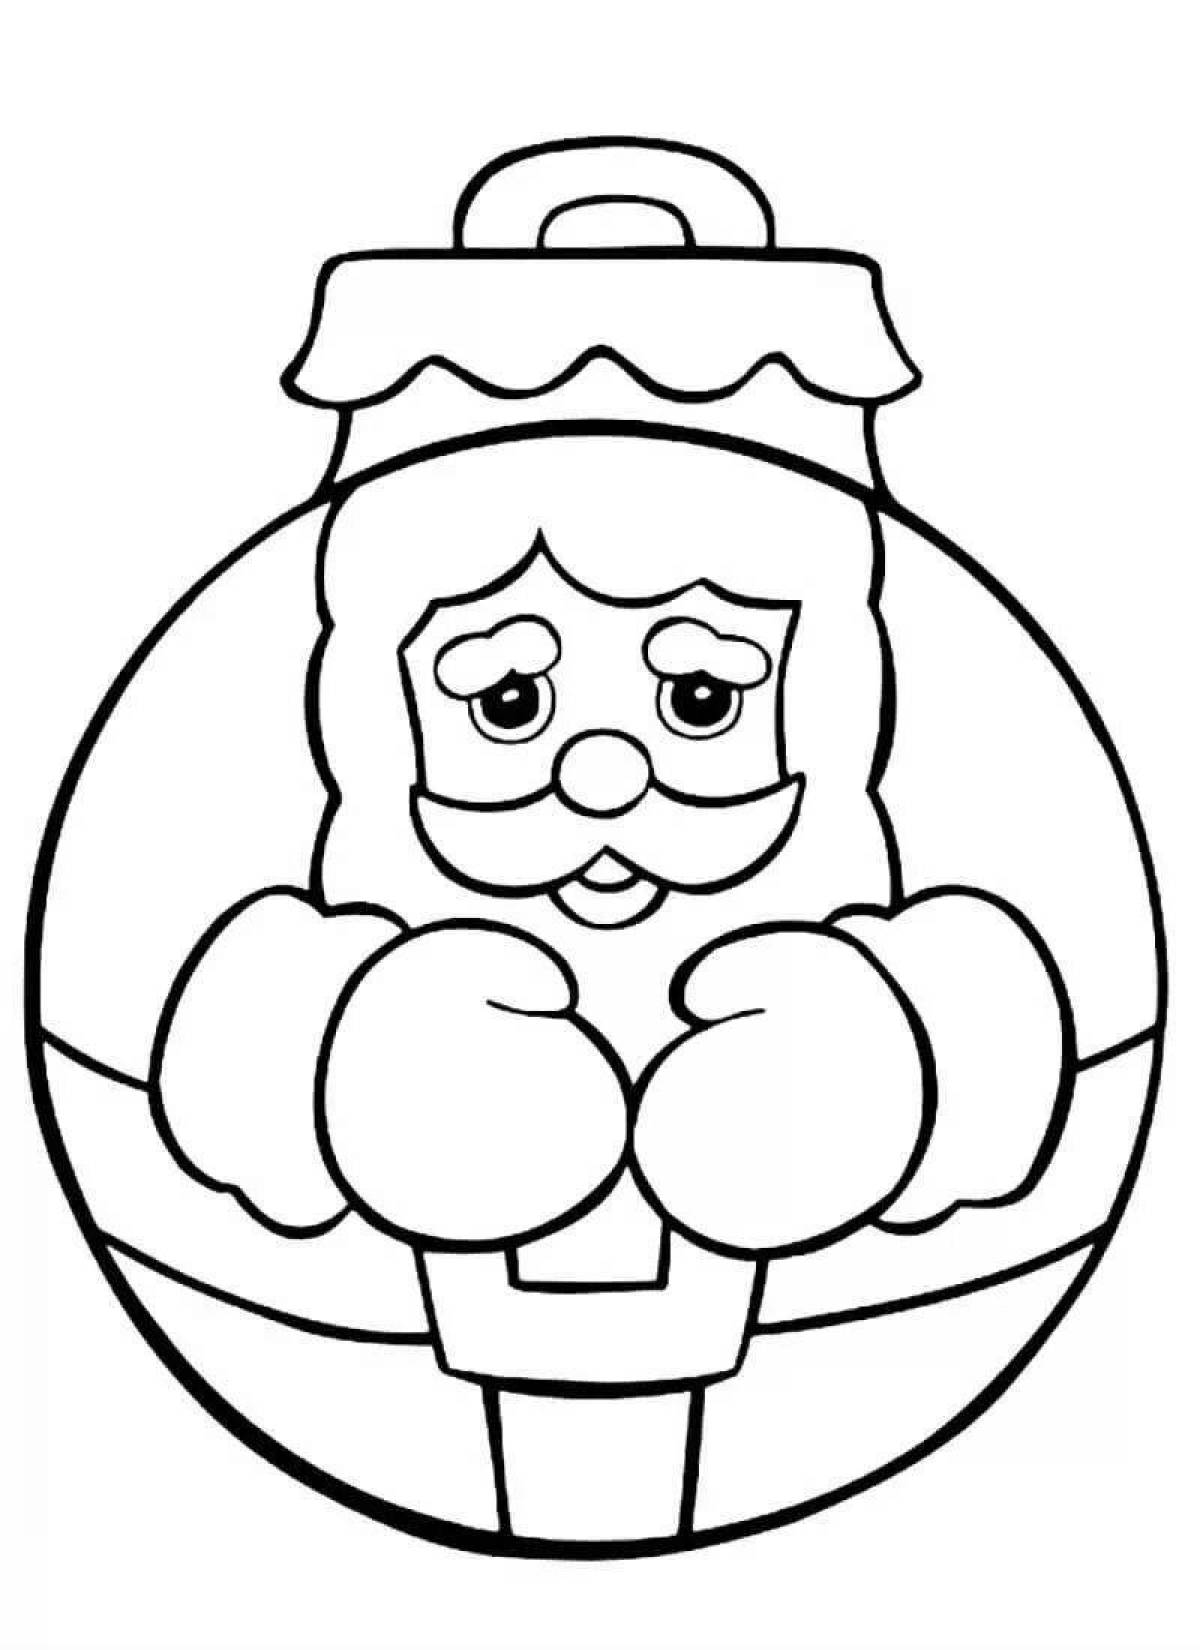 Blessed Christmas toys coloring page